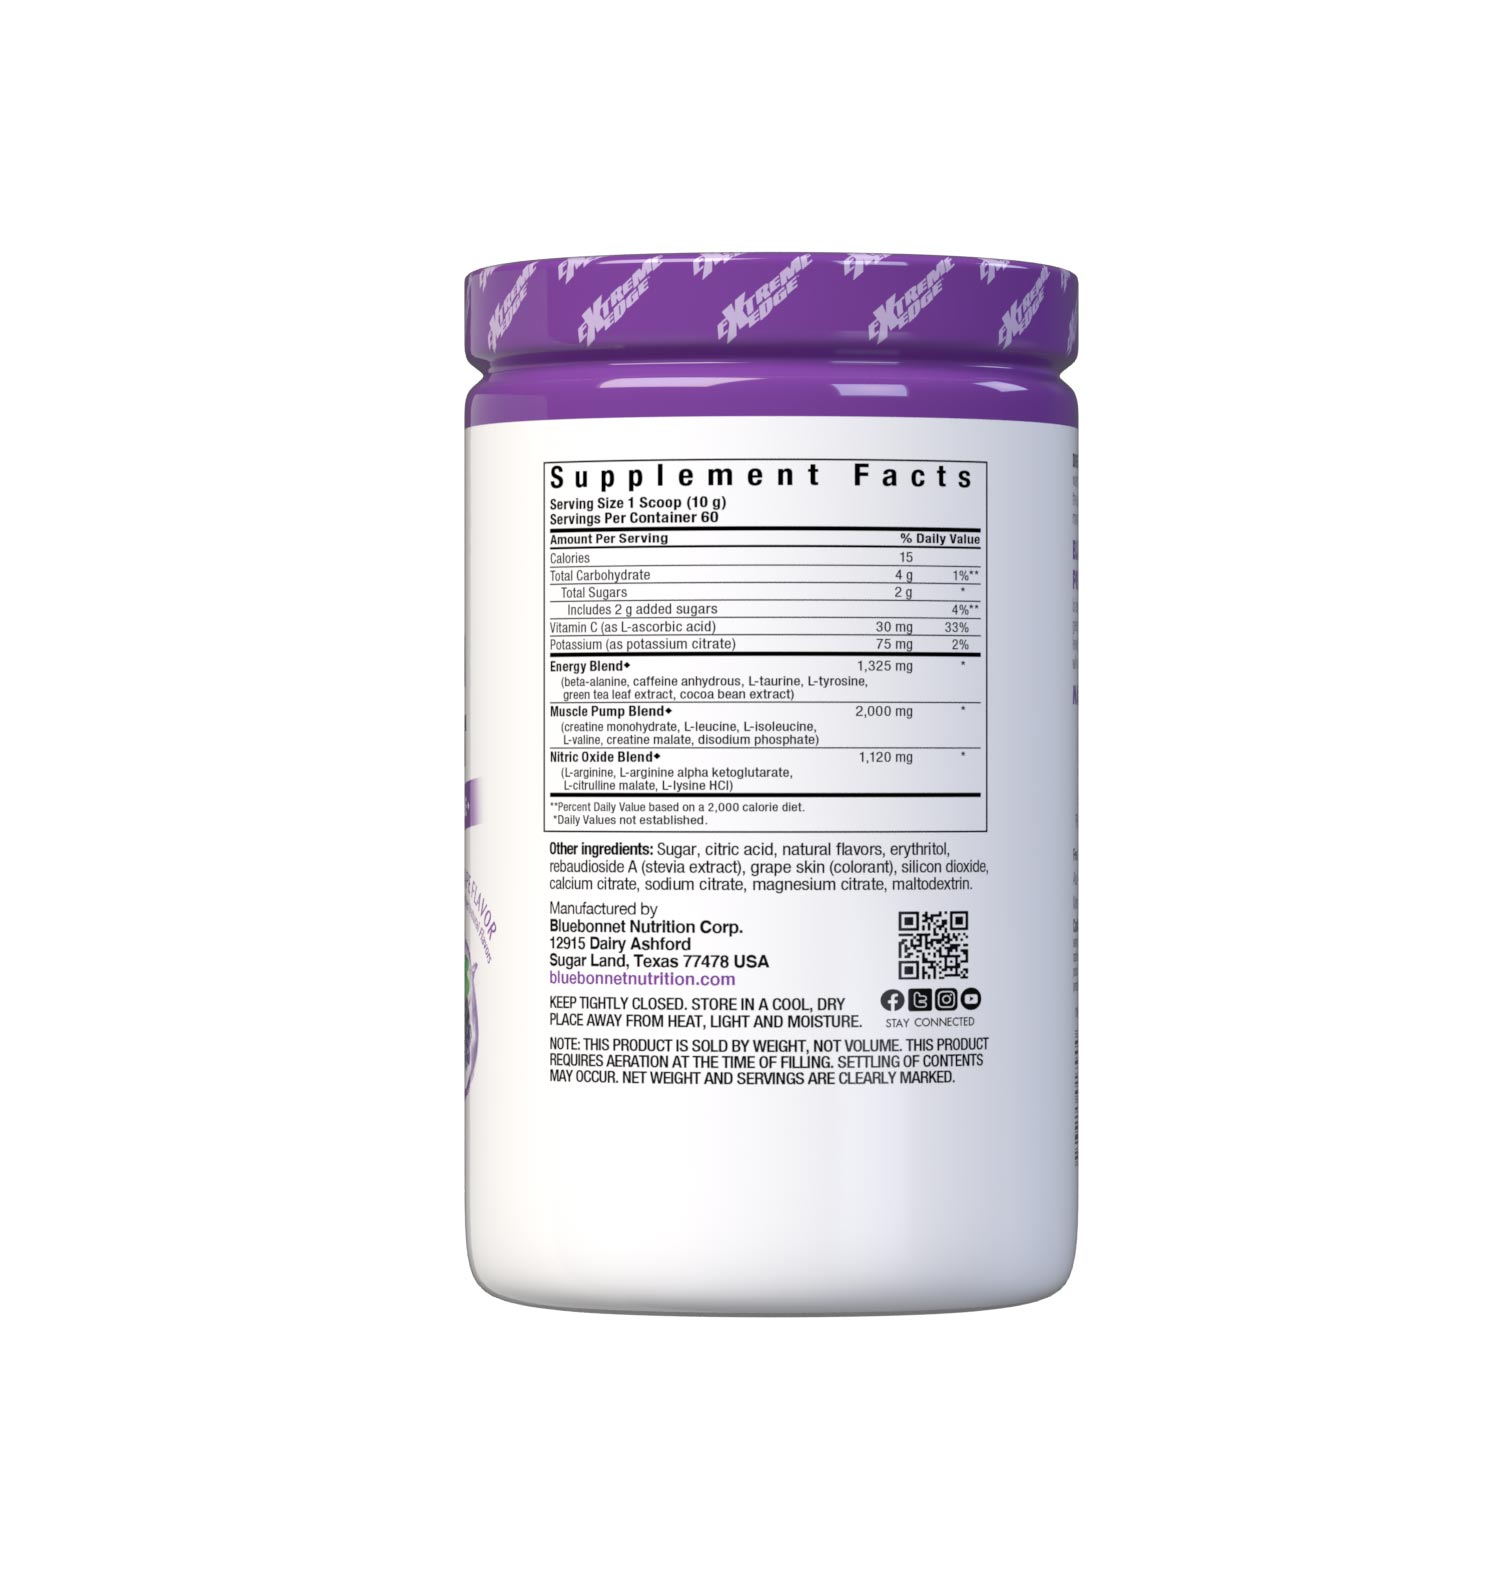 Bluebonnet's Grape Flavored Pre Workout powder is designed to be one of the most comprehensive, muscle recharging formulas ever created. This triple-turbo, super-charged formula generates high energy, sharpens mental concentration, and increases nitric oxide (NO) levels for greater blood flow and intense muscle pumps. Supplement facts panel. #size_1.32 lb